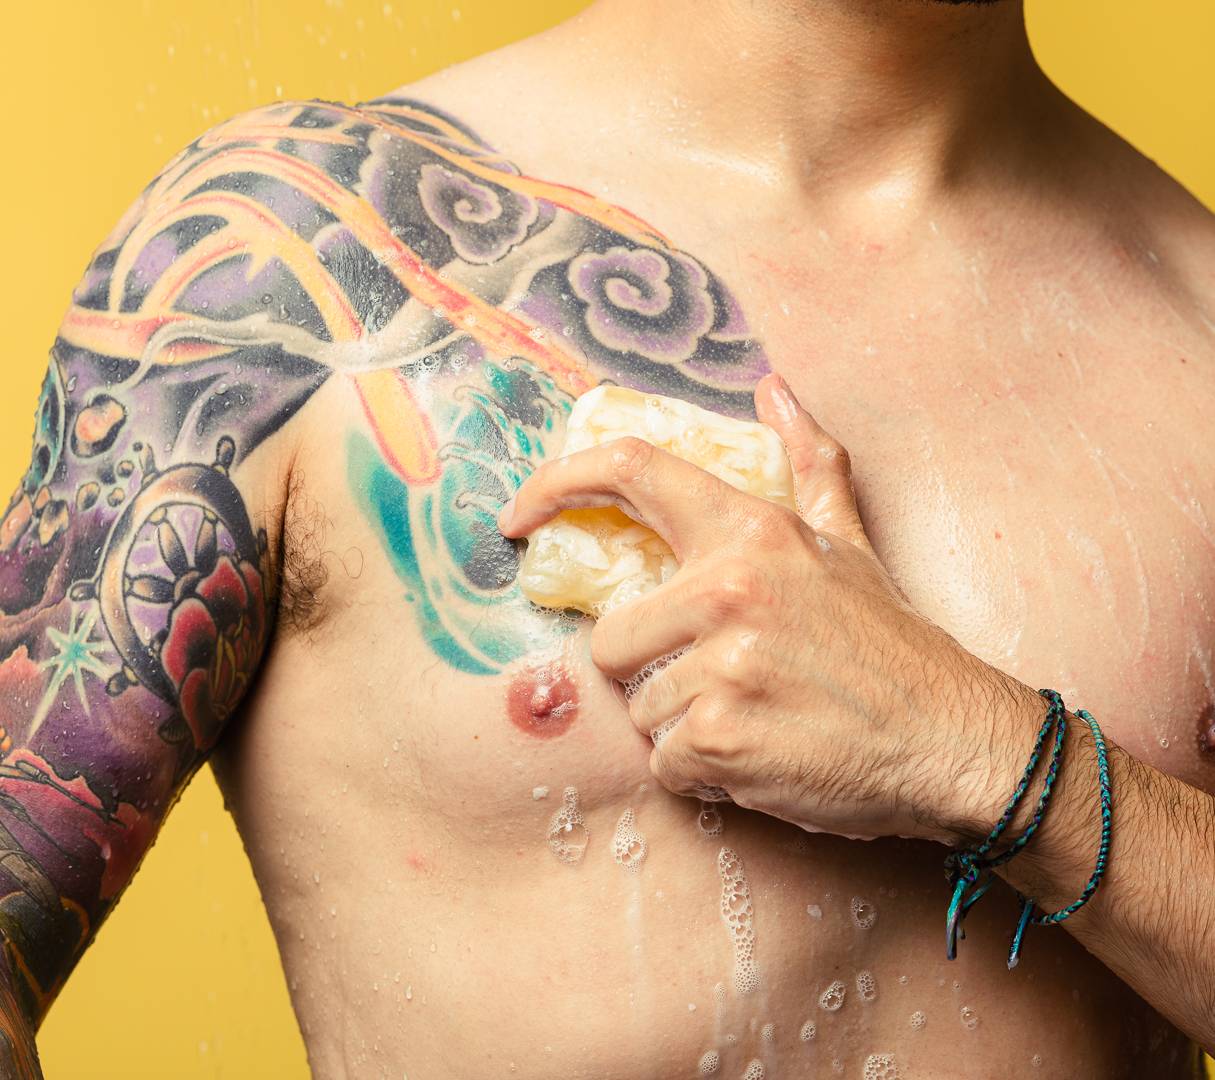 Bohemian, a light yellow, creamy swirled, smooth soap, is being rubbed across a tattooed chest, creating bubbles.